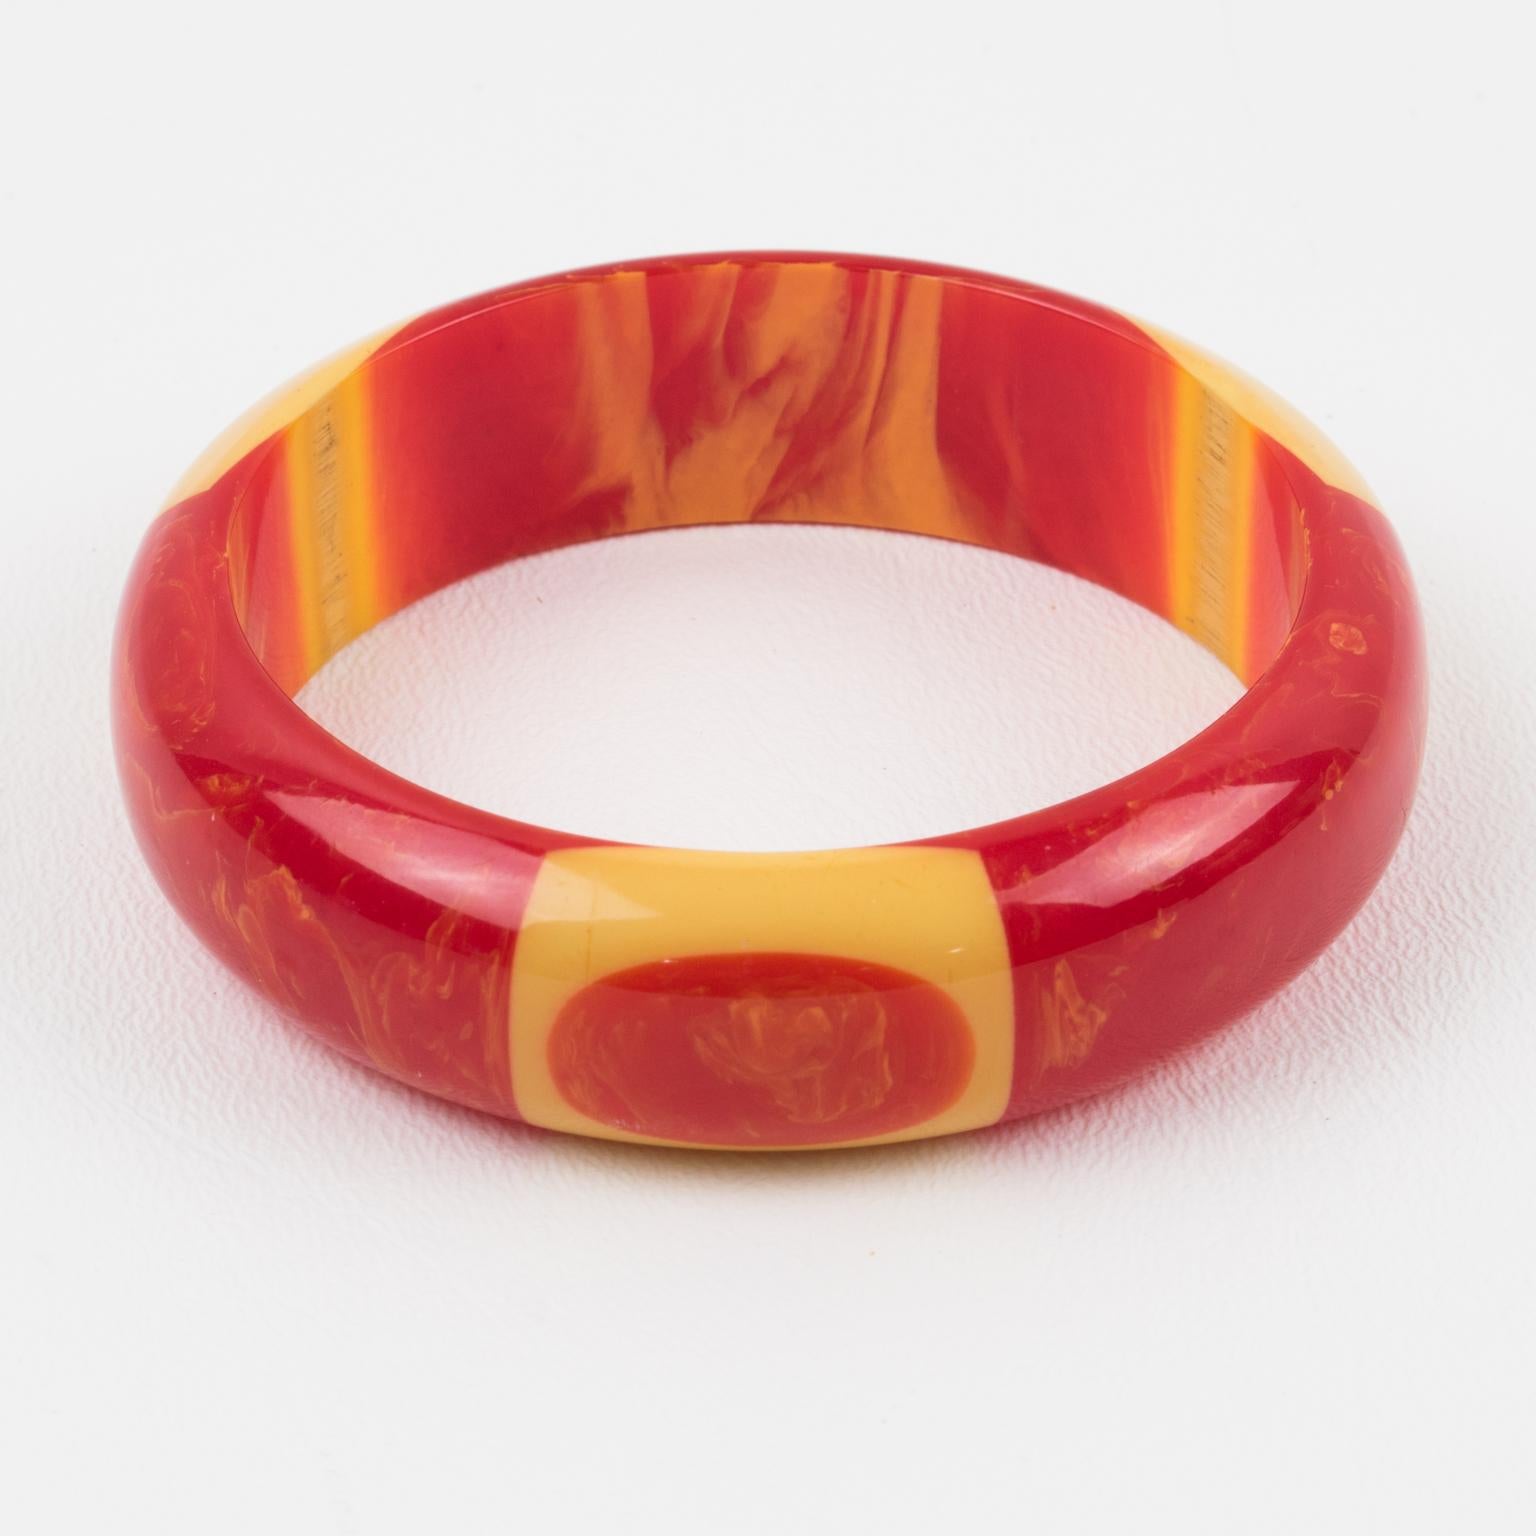 This outstanding Belle Kogan Bakelite elongated inlay dot bracelet bangle is a must-have in a Bakelite collection. The dots are set with yellow banana surrounds in a cheesy red marble color and appear three times around the bangle. The bracelet has